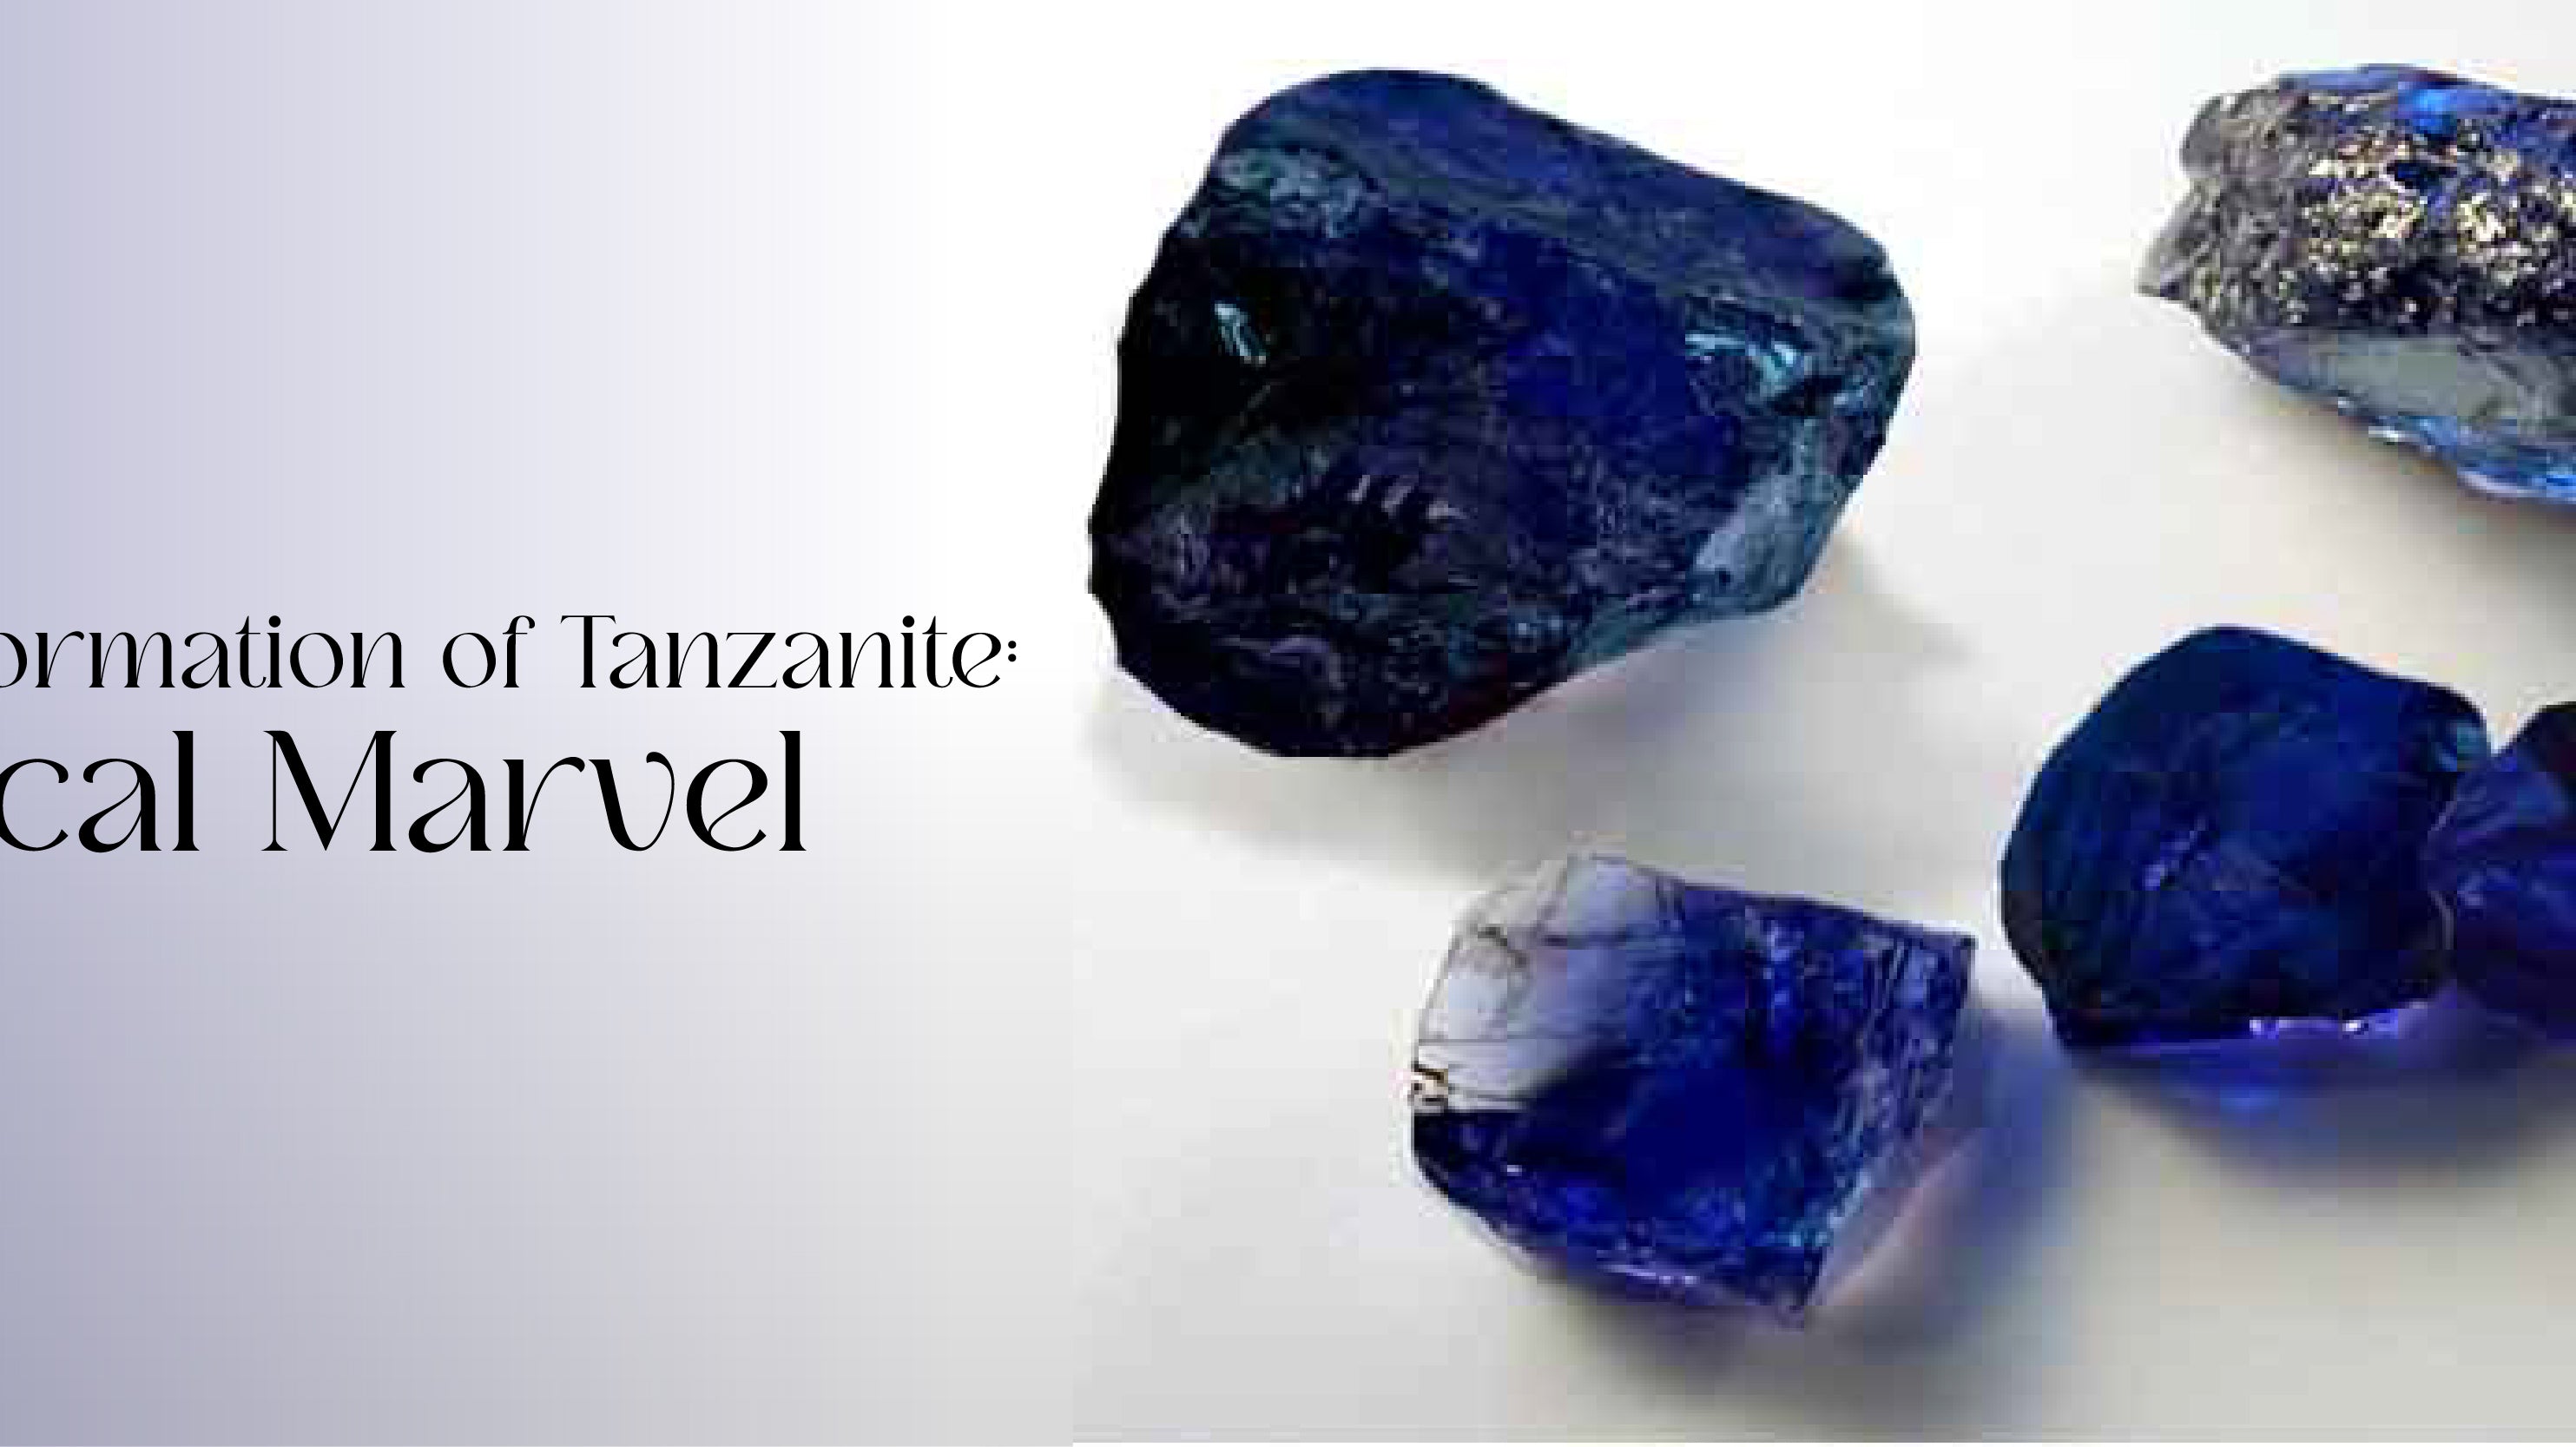 Exploring the Formation of Tanzanite: A Geological Marvel